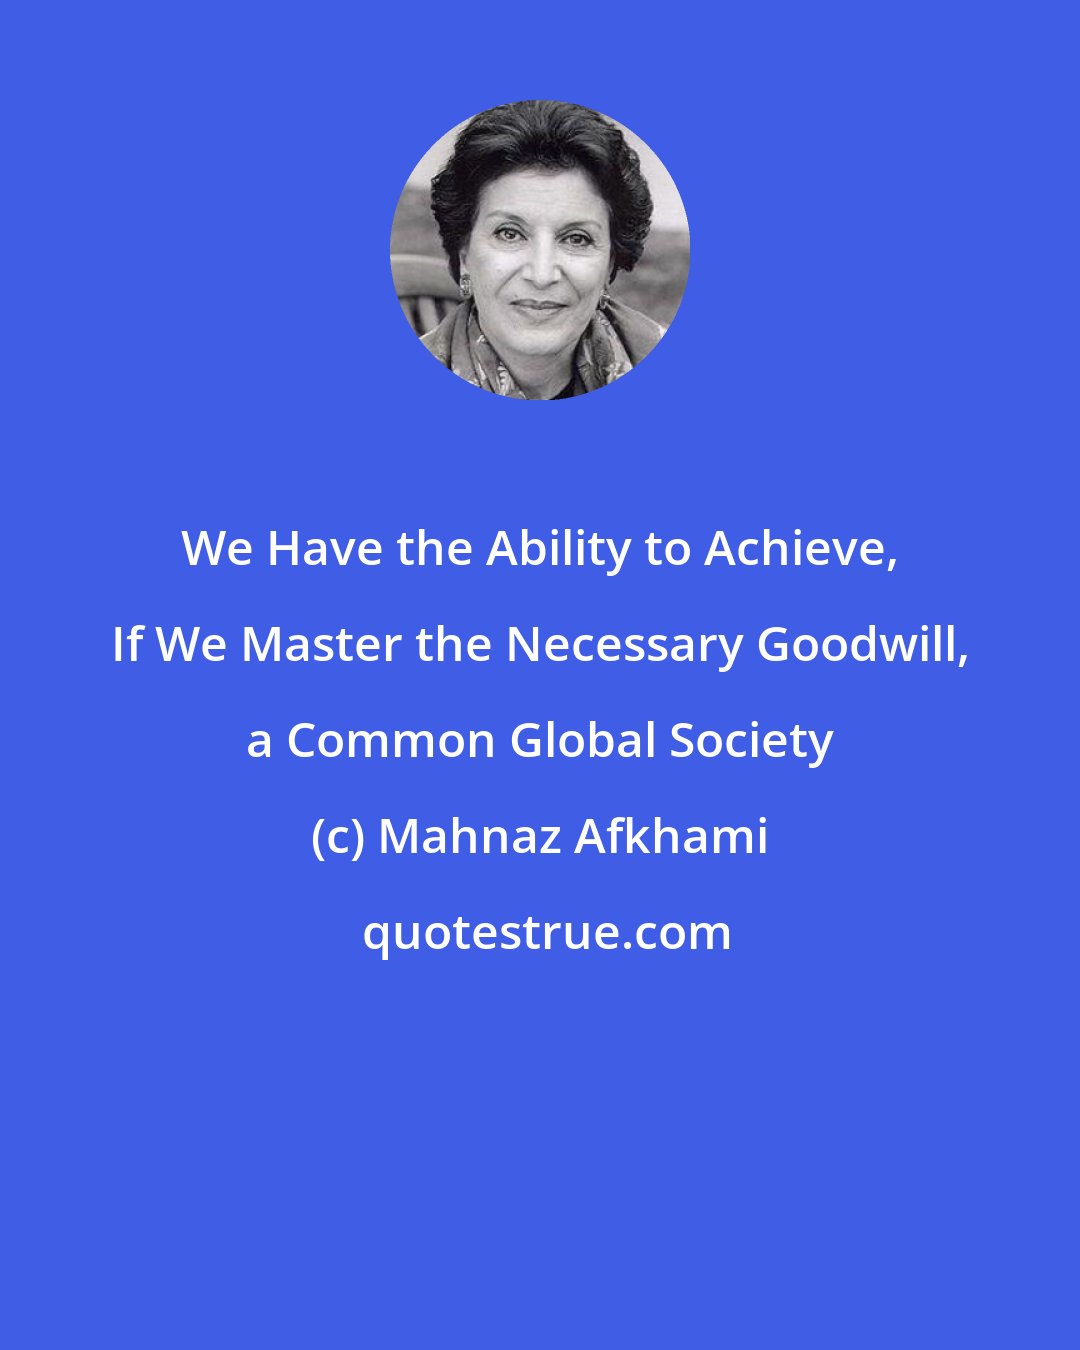 Mahnaz Afkhami: We Have the Ability to Achieve, If We Master the Necessary Goodwill, a Common Global Society